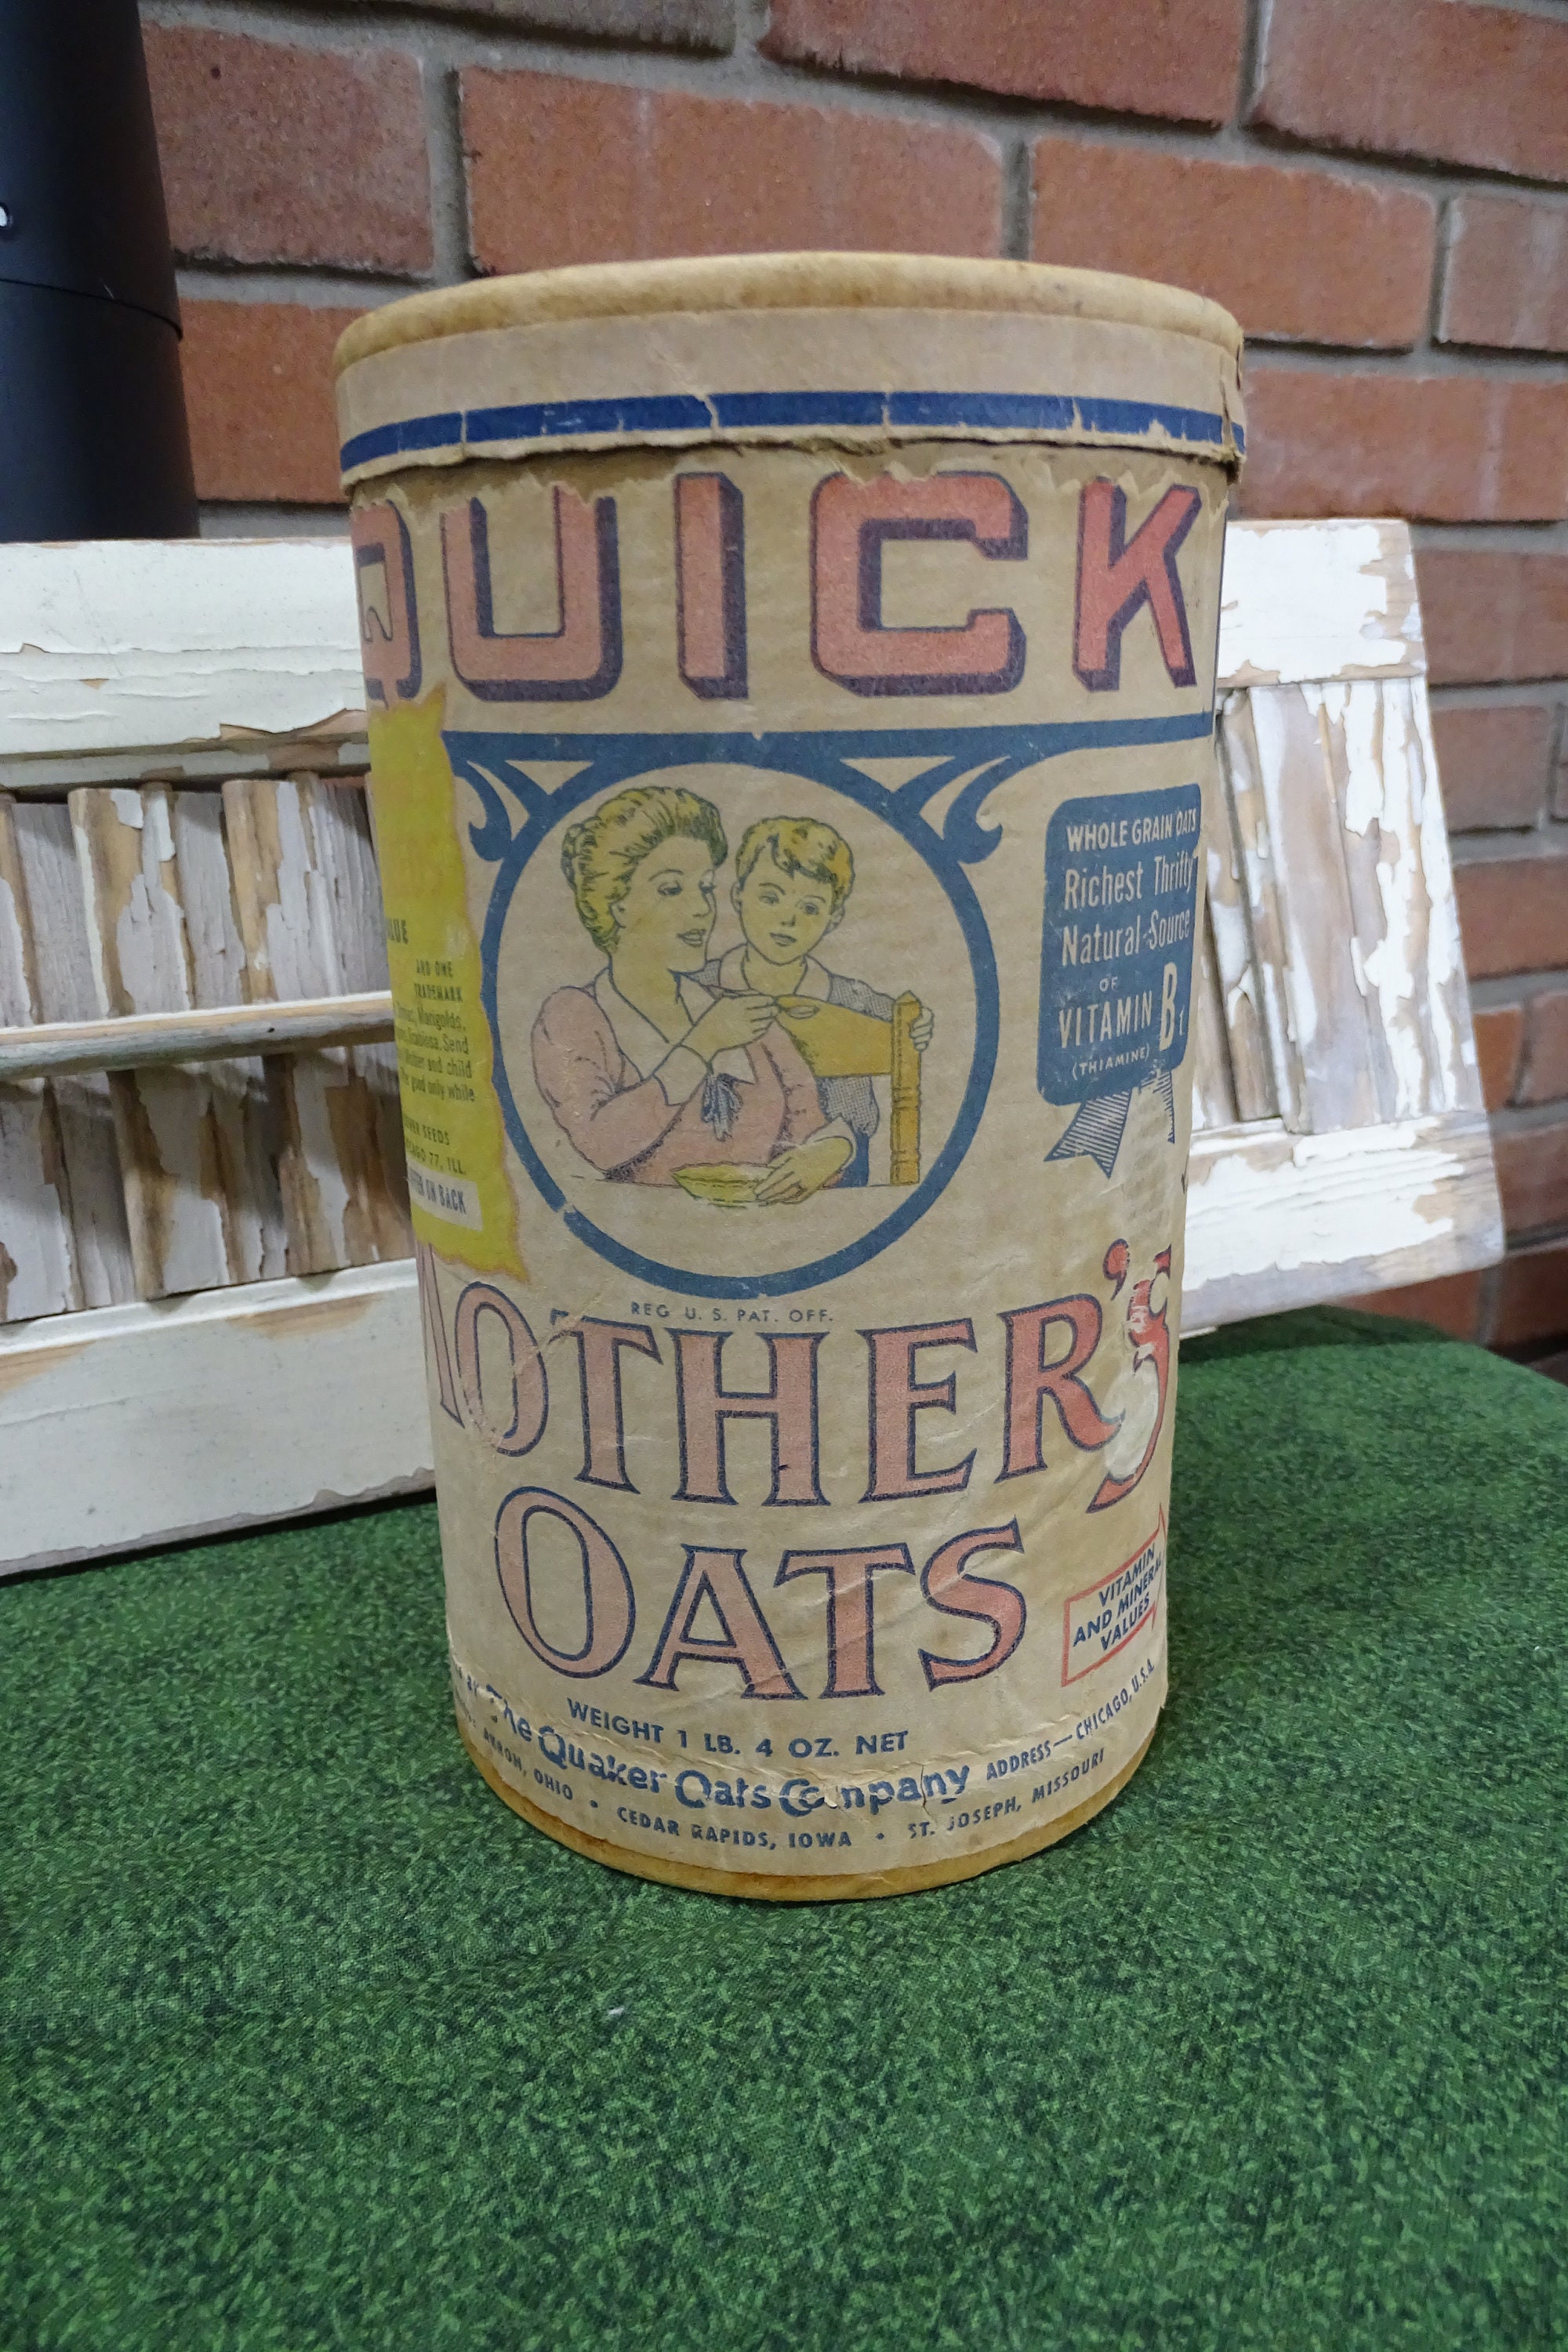 COLLECTION OF 3 QUAKER OATS CONTAINER - BOX VINTAGE & 1922 REPLICA LABEL on  eBid United States